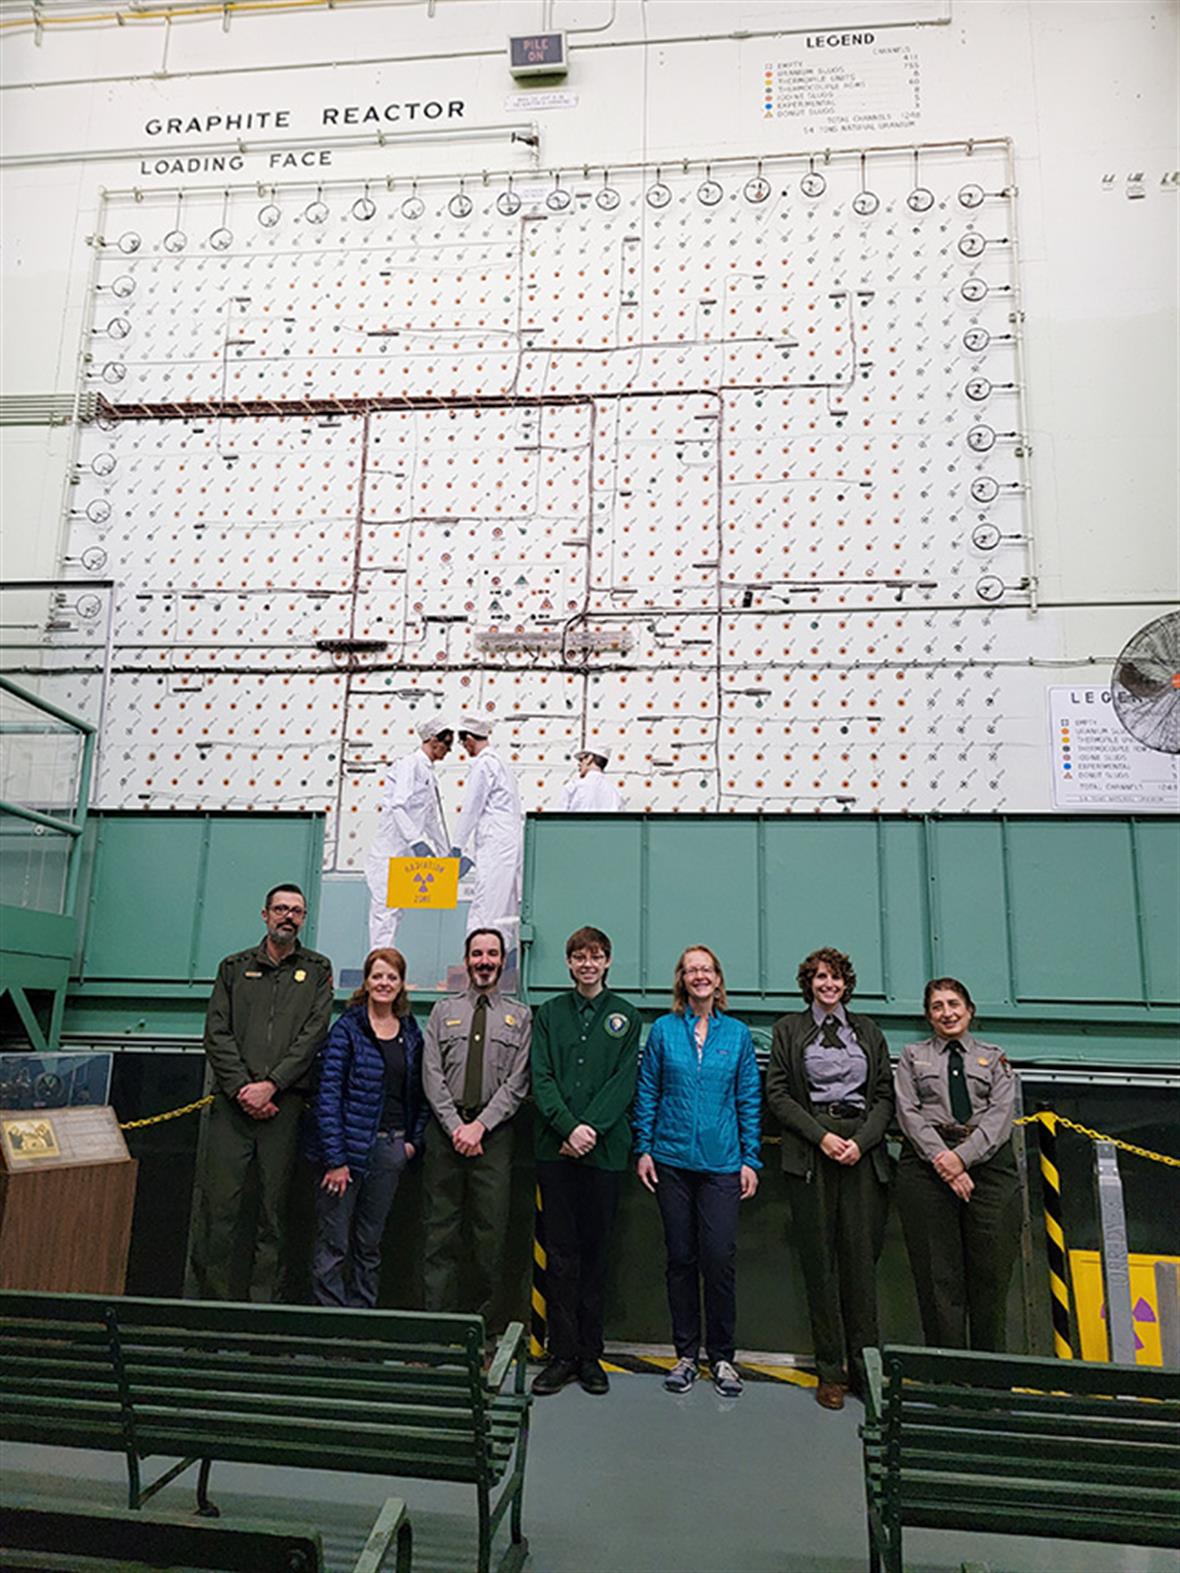 A group of people pose for a picture in front of a display at a historical reactor site.